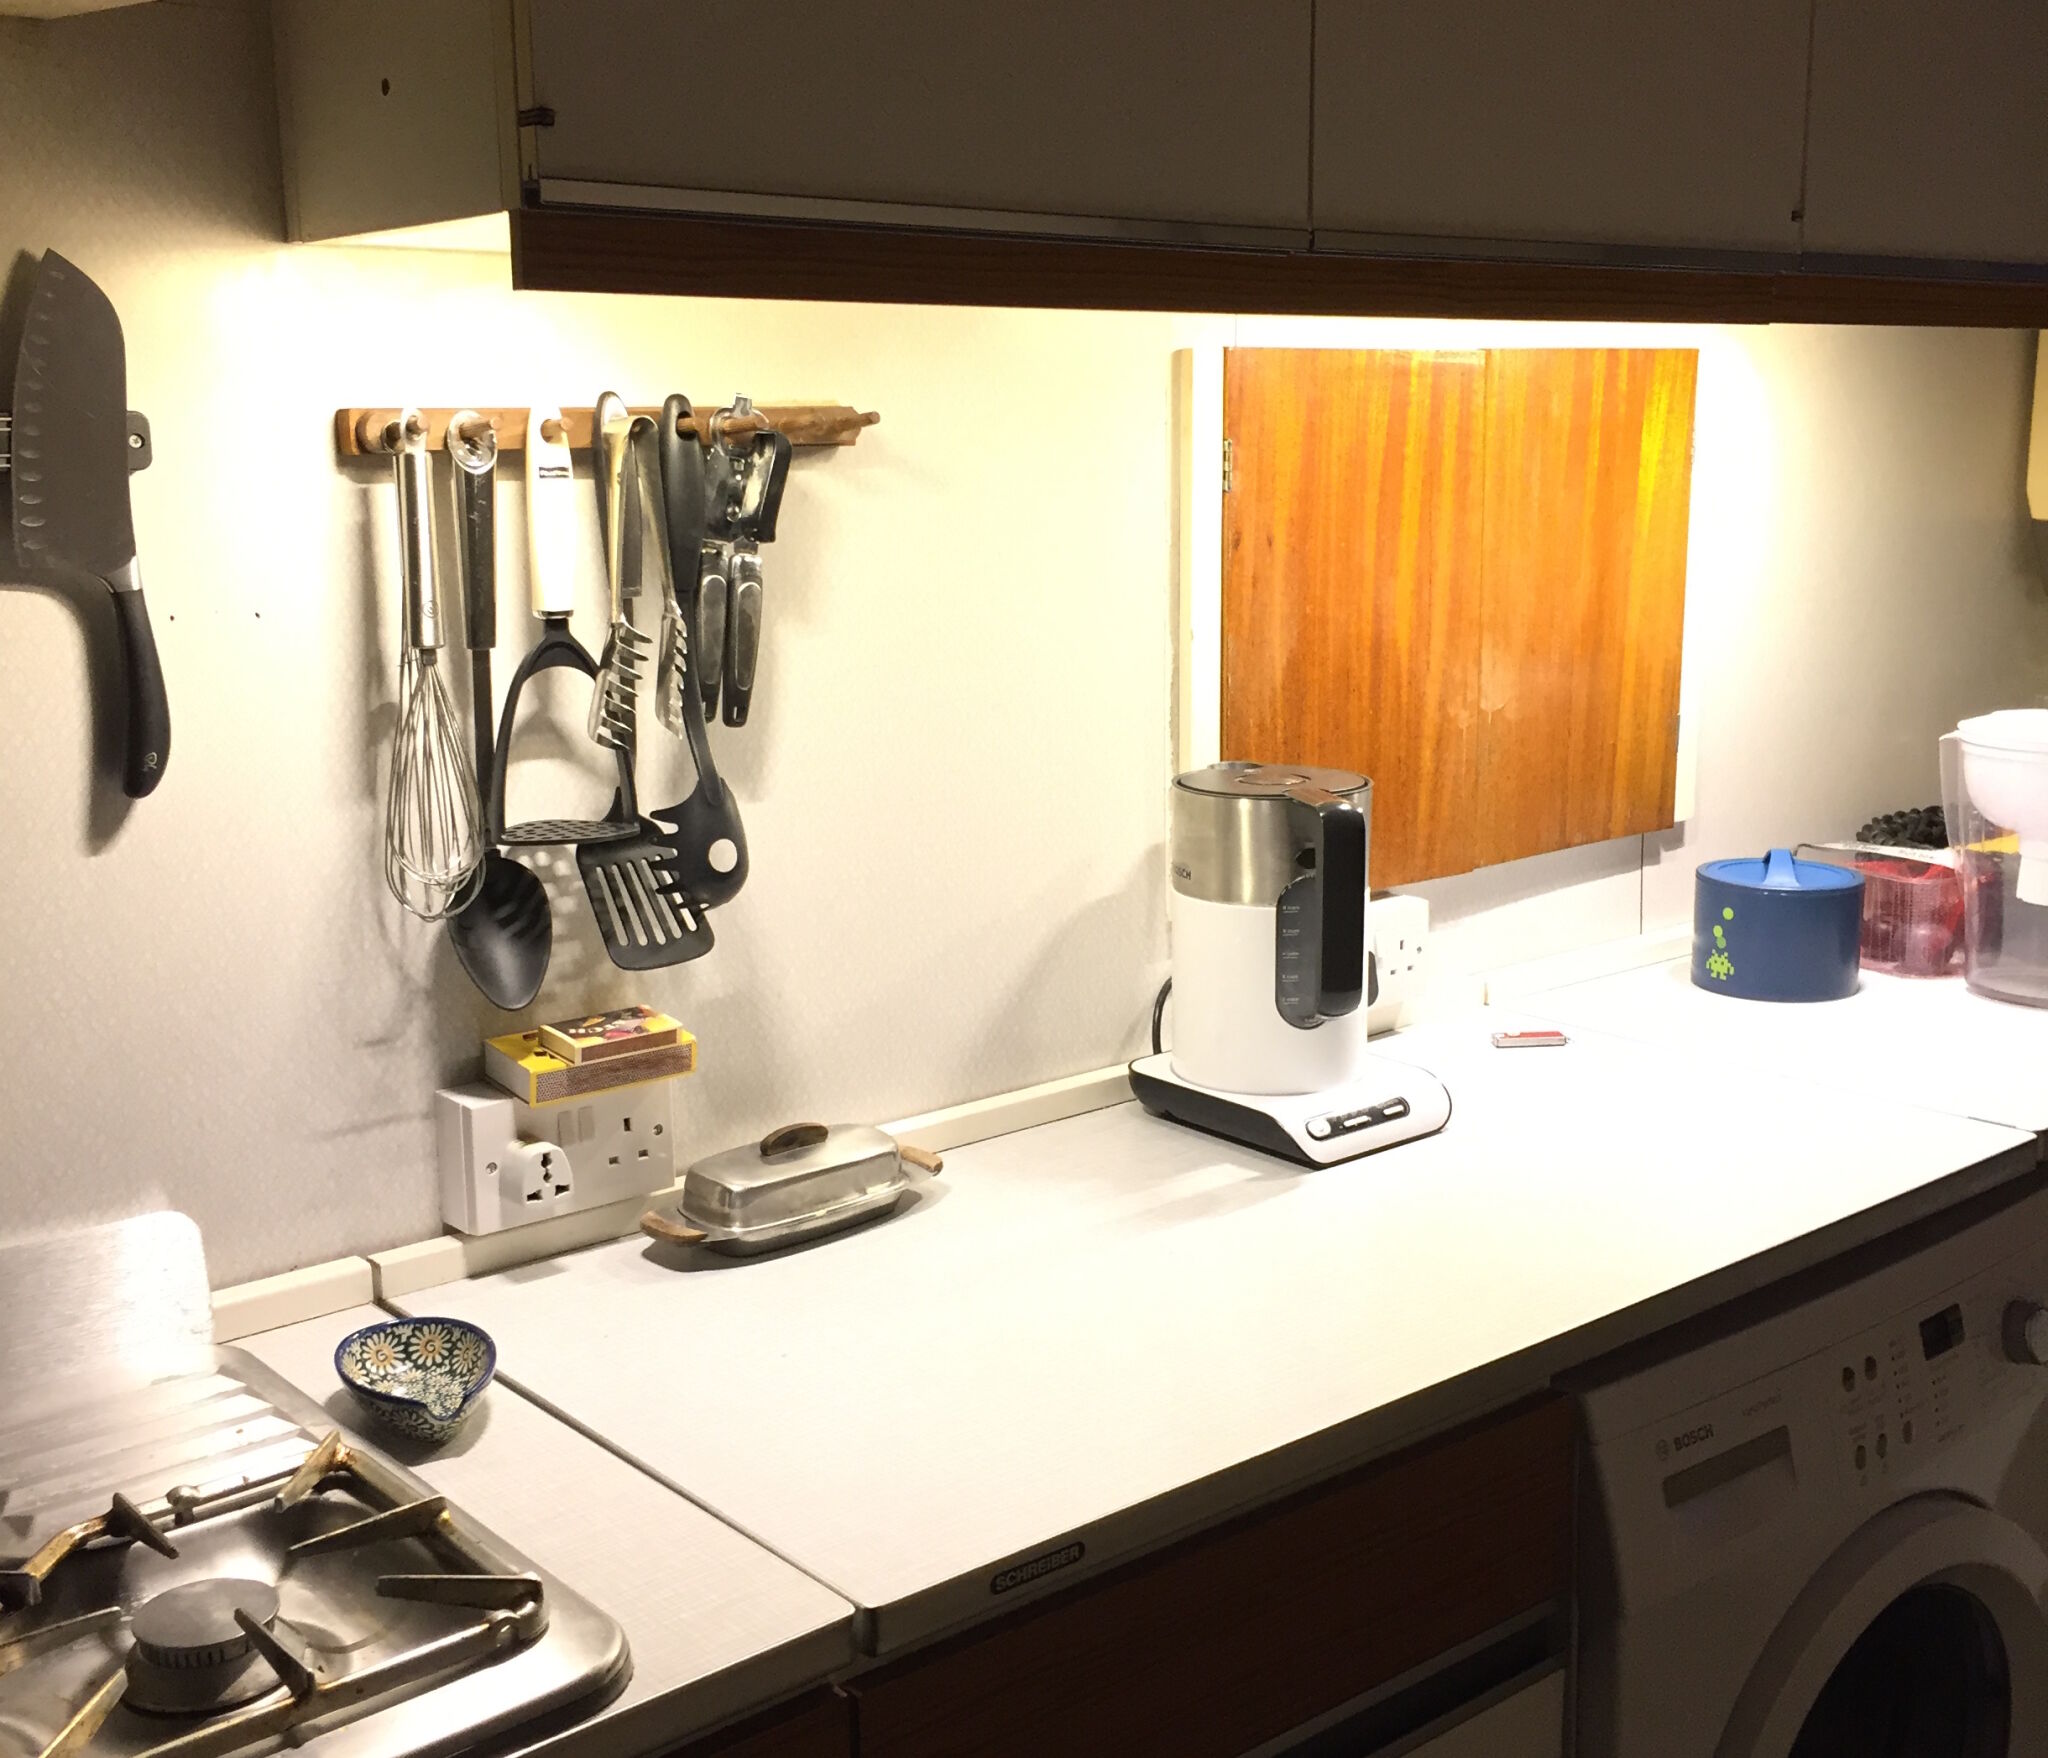  The 1970s kitchen countertop is now well-lit...